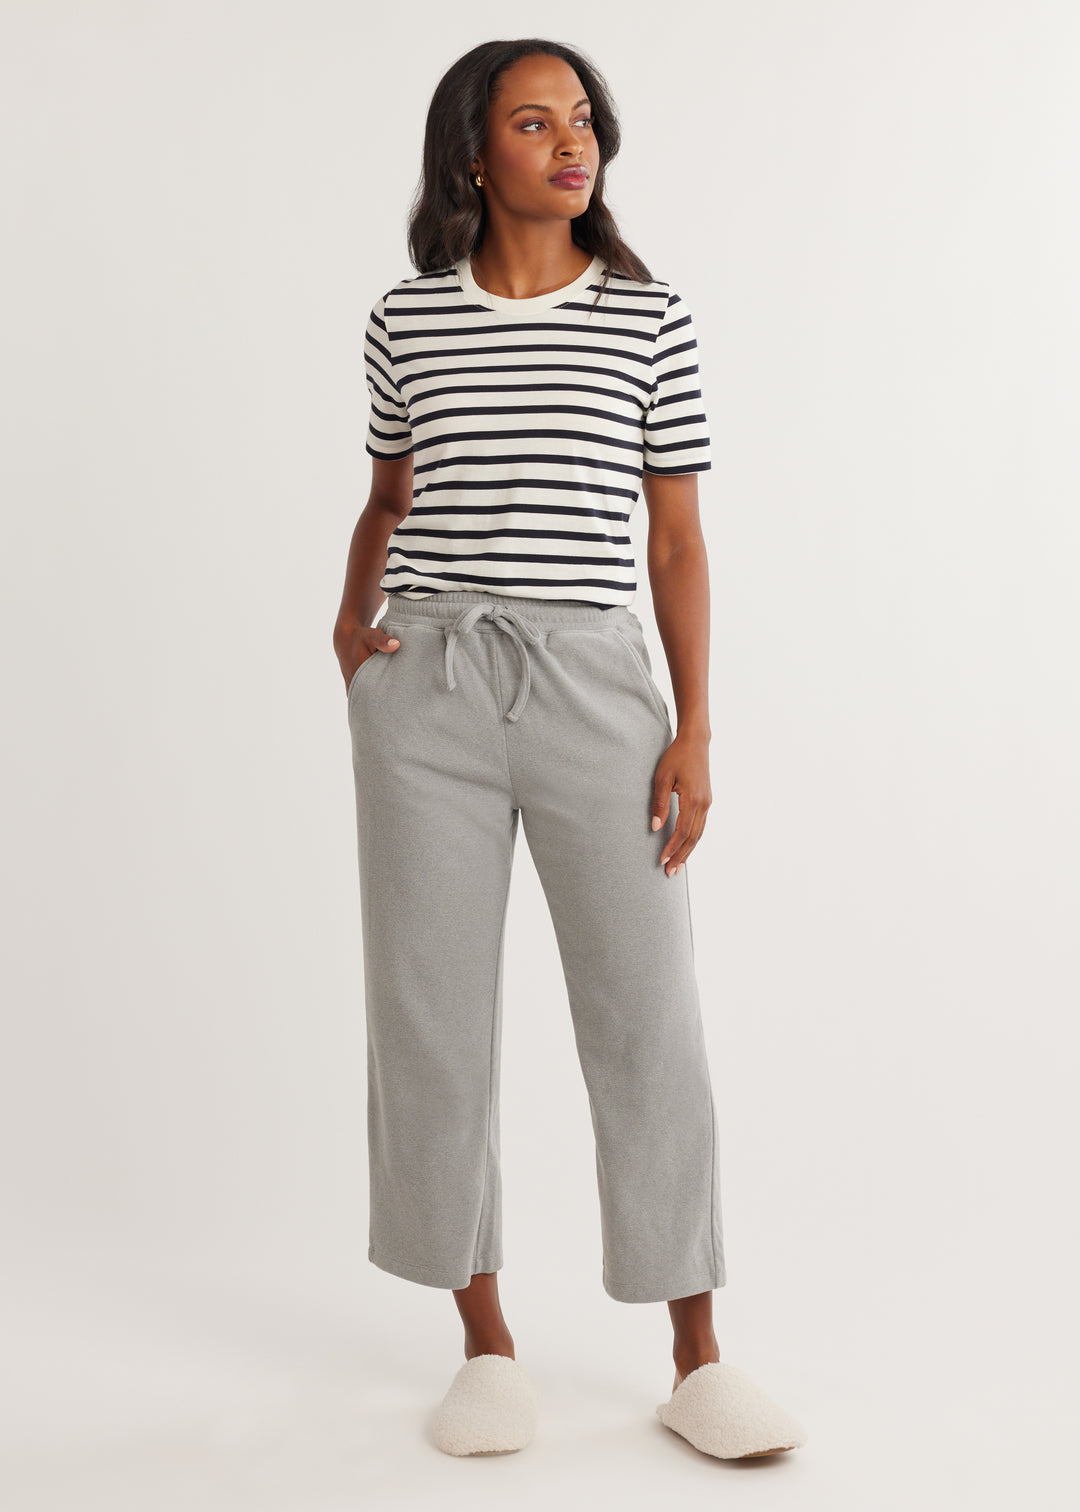 Chateau Lounge Pant in Terry Fleece (Heather Grey)